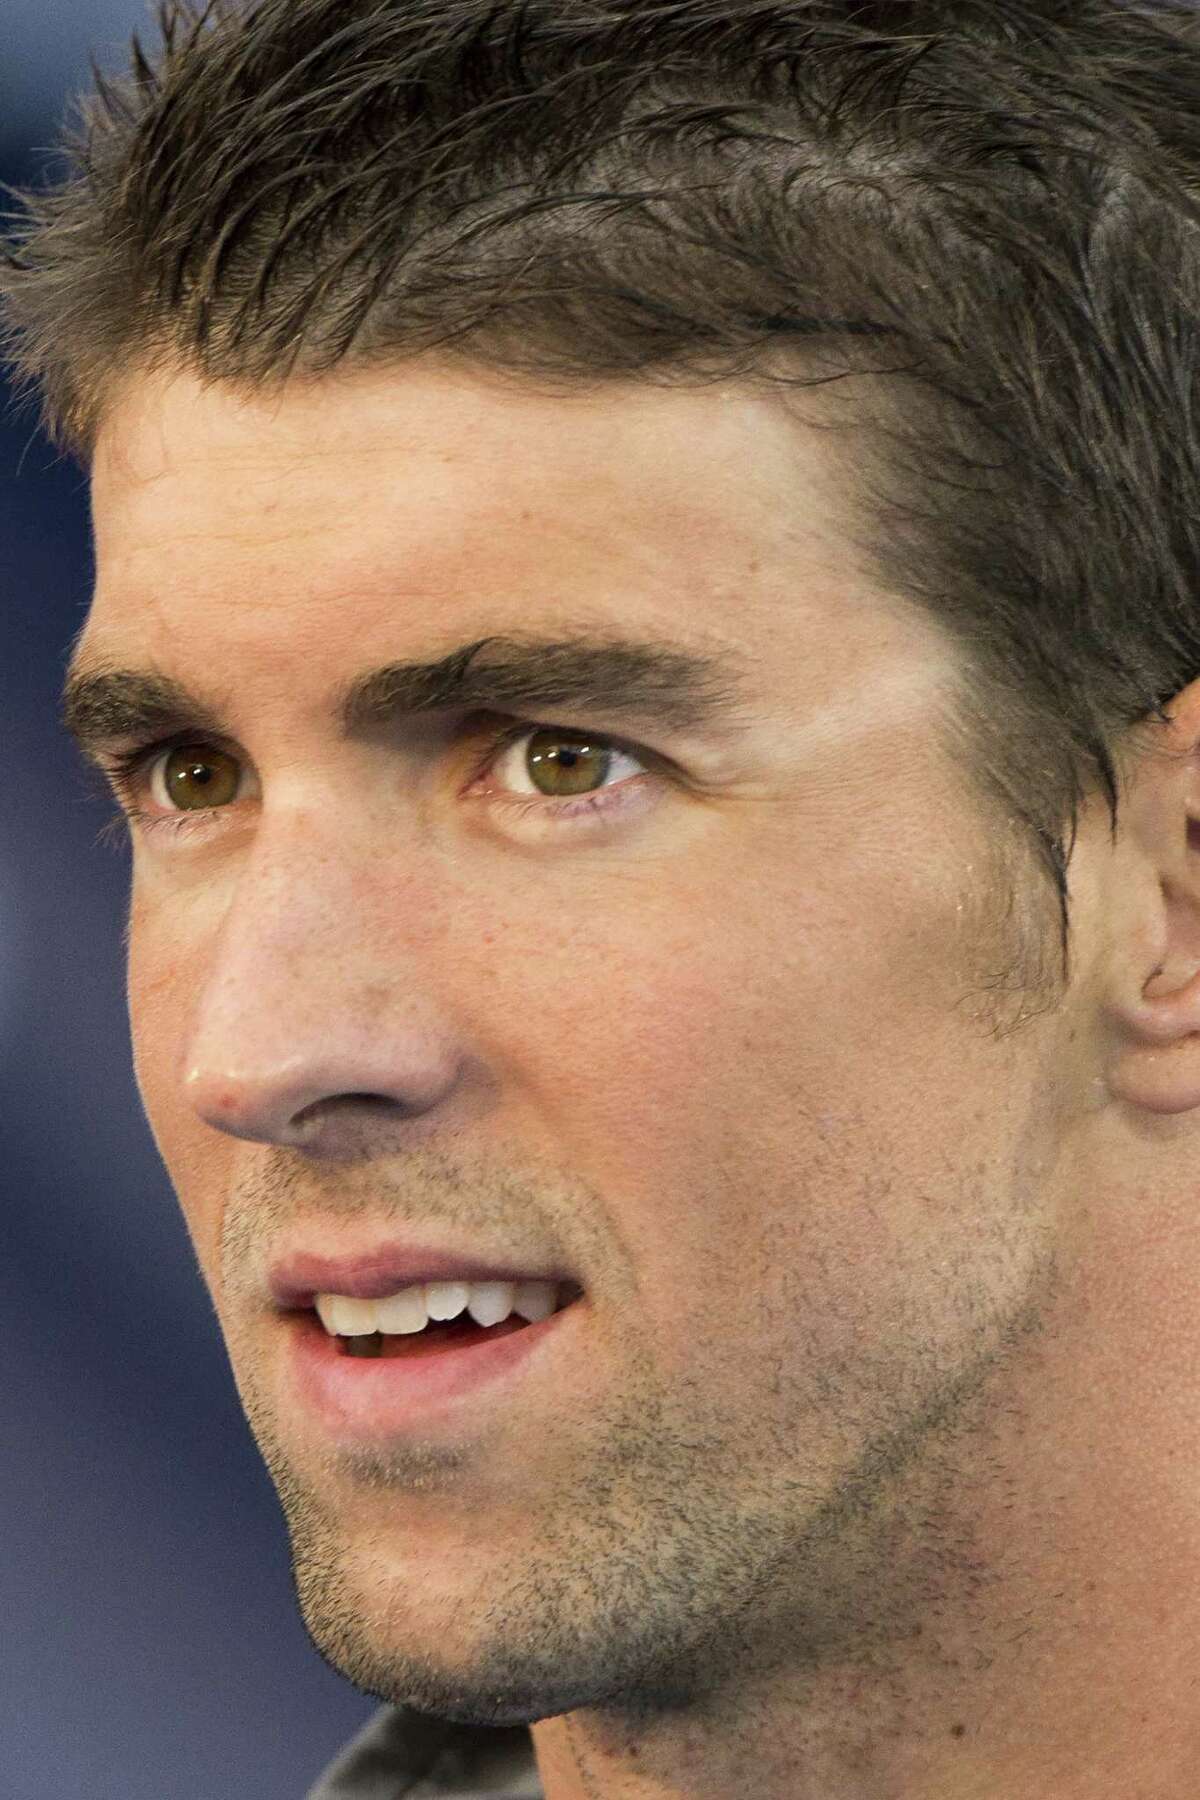 Michael Phelps won't be able to compete at next year's world championships and loses his training stipend.